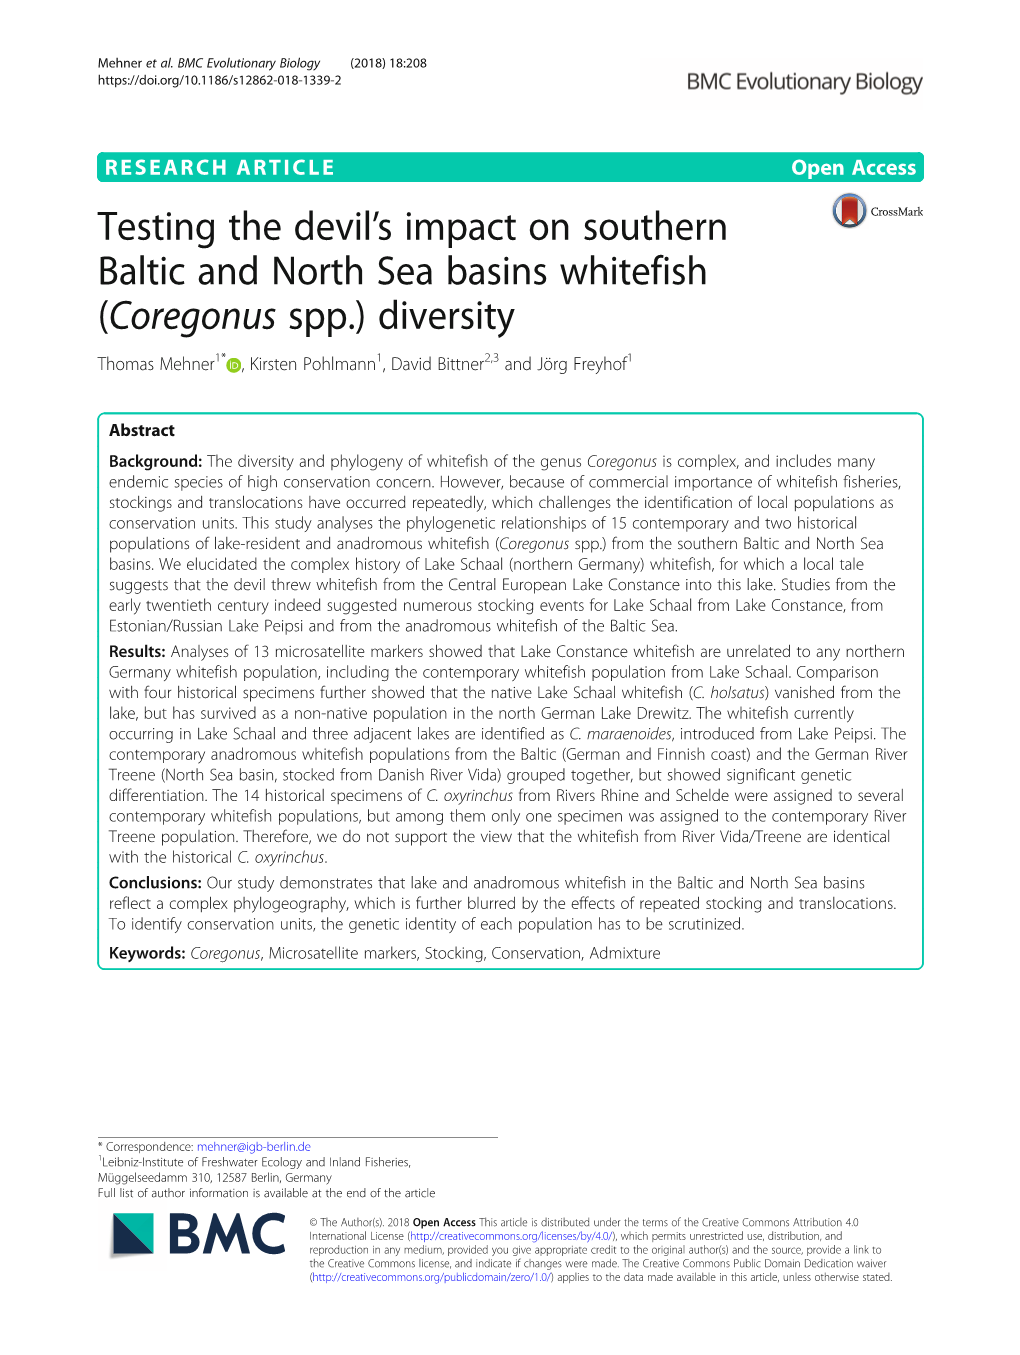 Testing the Devil's Impact on Southern Baltic and North Sea Basins Whitefish (Coregonus Spp.) Diversity